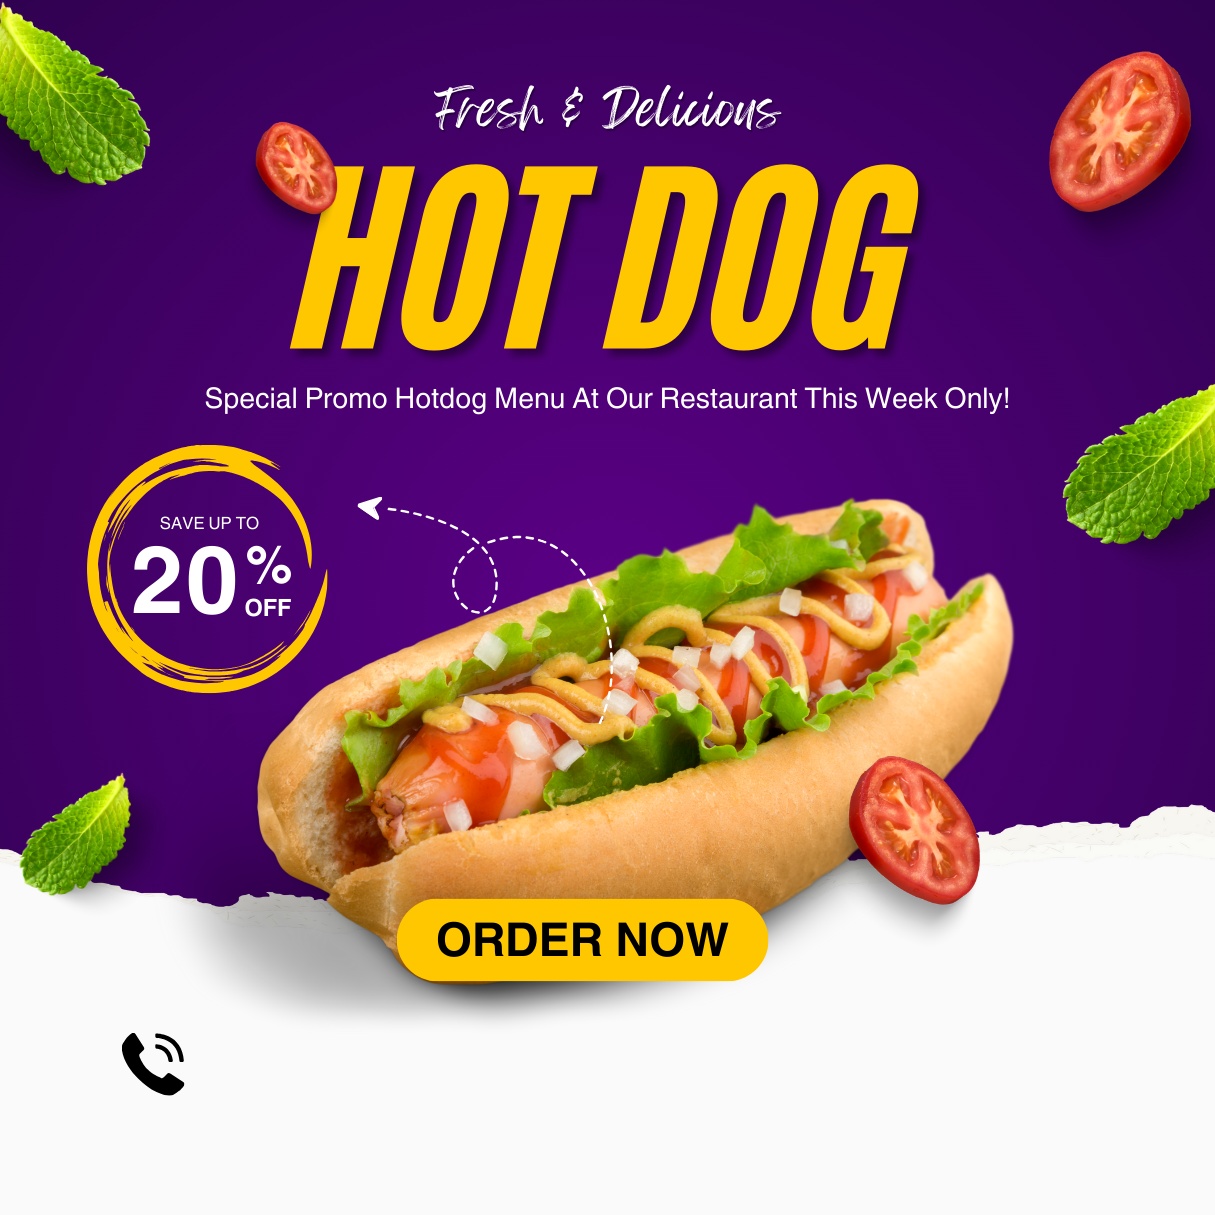 fresh and delicious hot dog preview image.